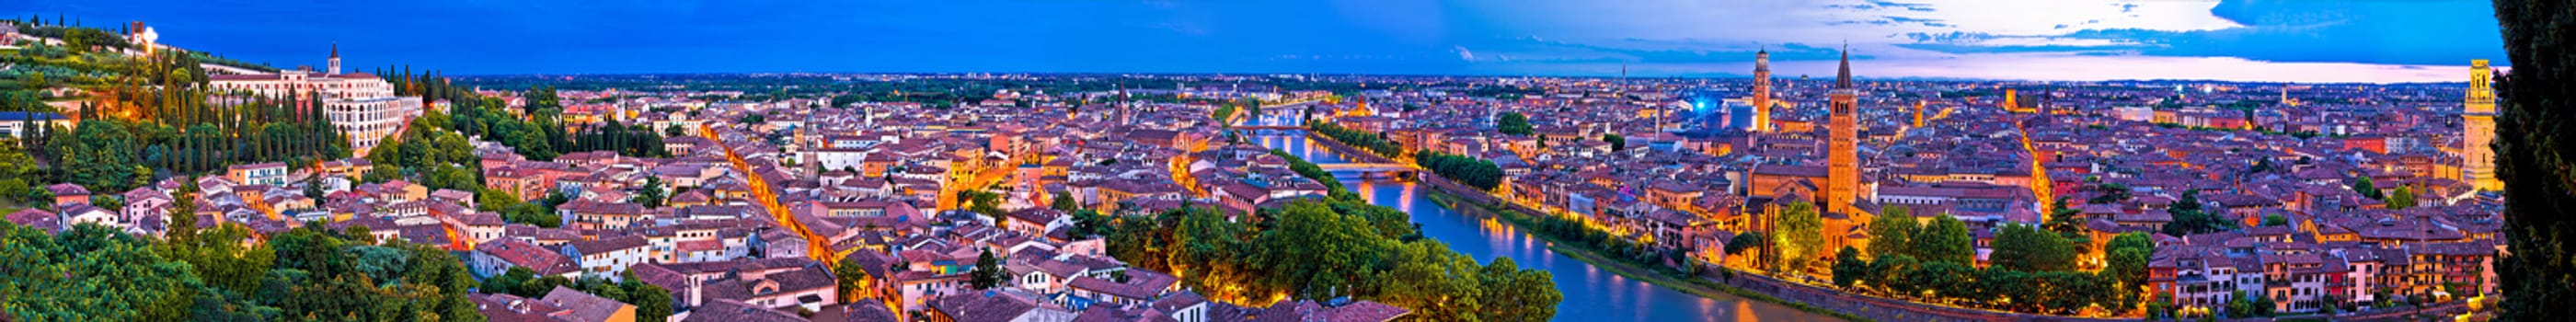 Verona old city and Adige river panoramic aerial view at evening, Veneto region of Italy